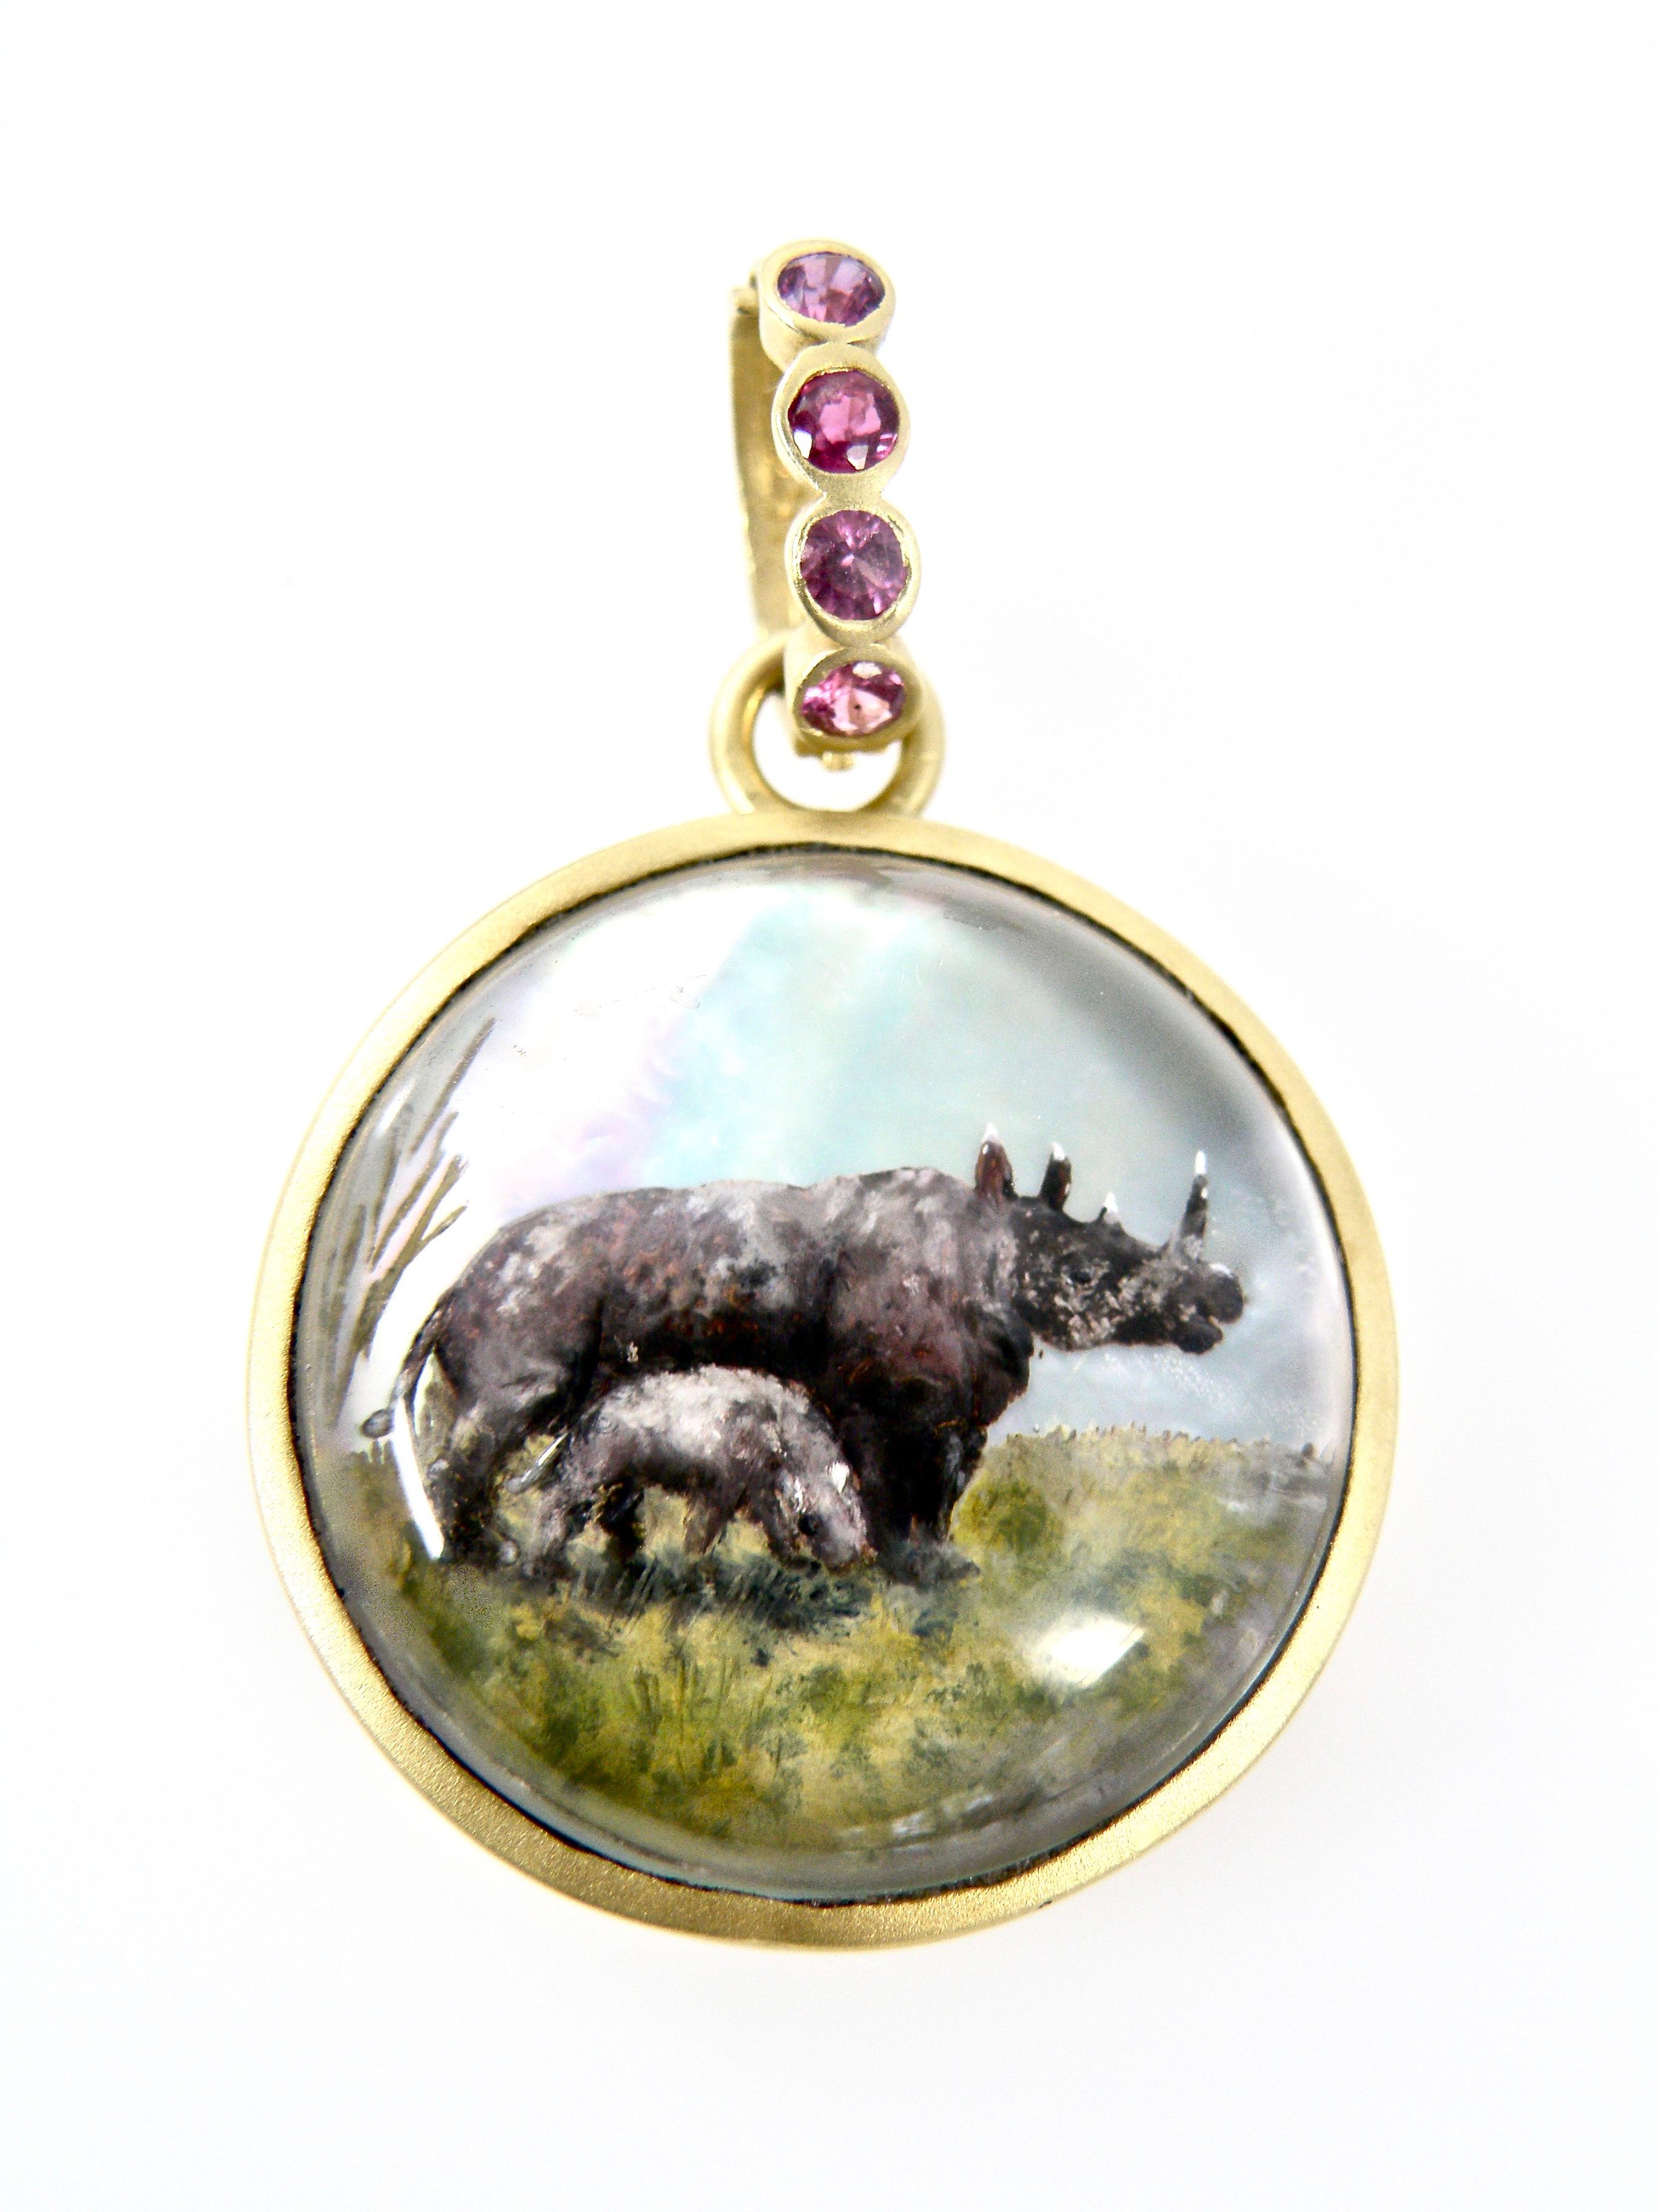 18 karat gold pendant of a Hand painted reverse crystal carving of a Rhinocerous family with a Sapphire bail pendant. Aprox 28 mm round